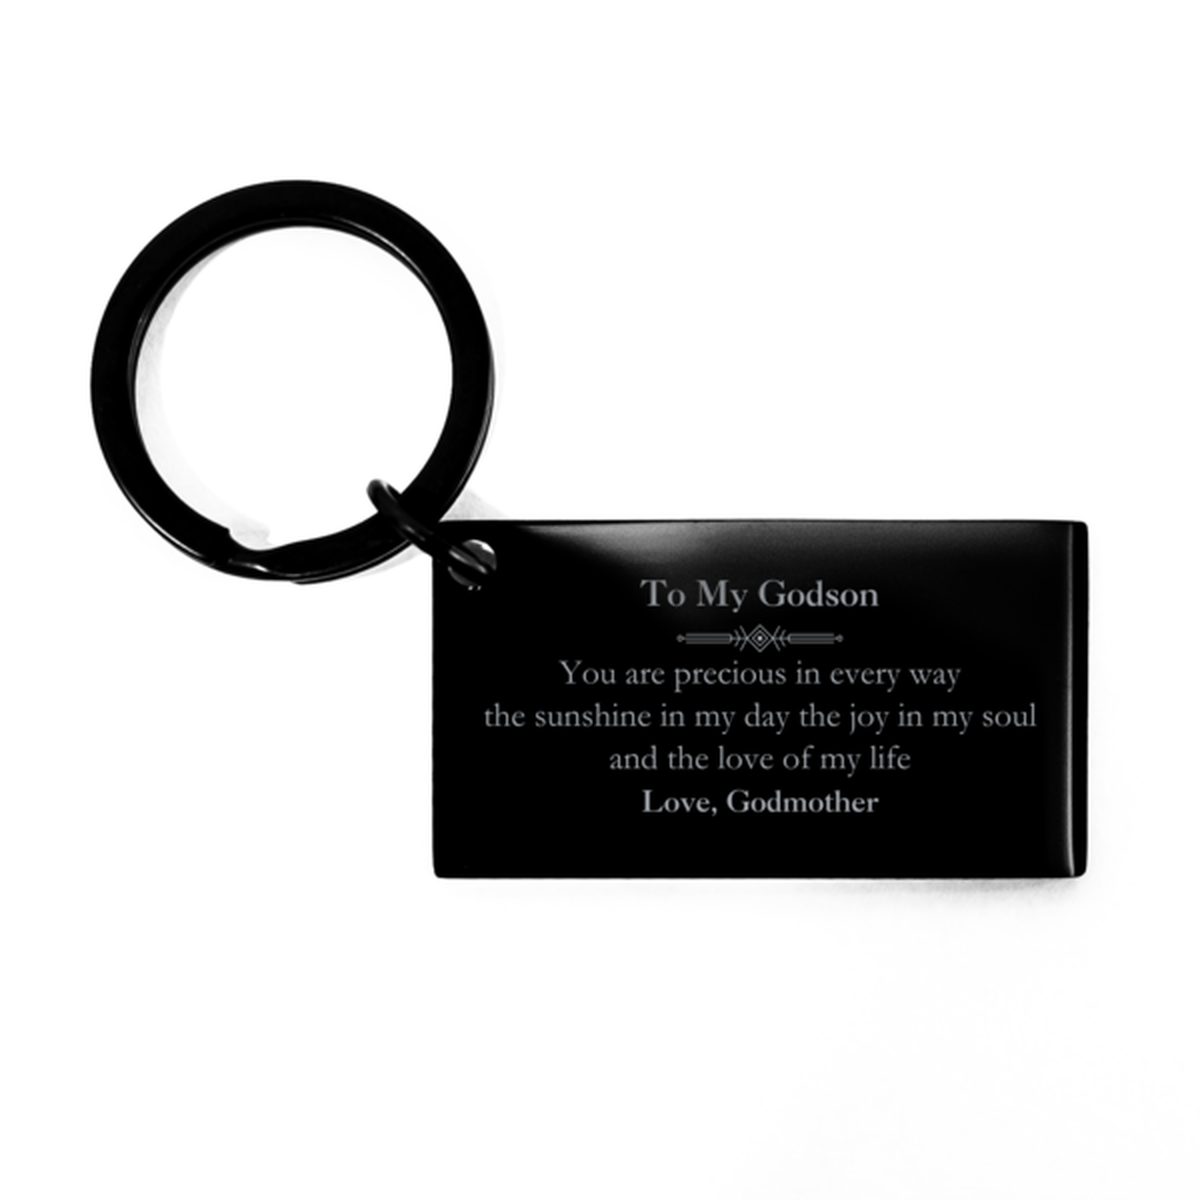 Graduation Gifts for Godson Keychain Present from Godmother, Christmas Godson Birthday Gifts Godson You are precious in every way the sunshine in my day. Love, Godmother